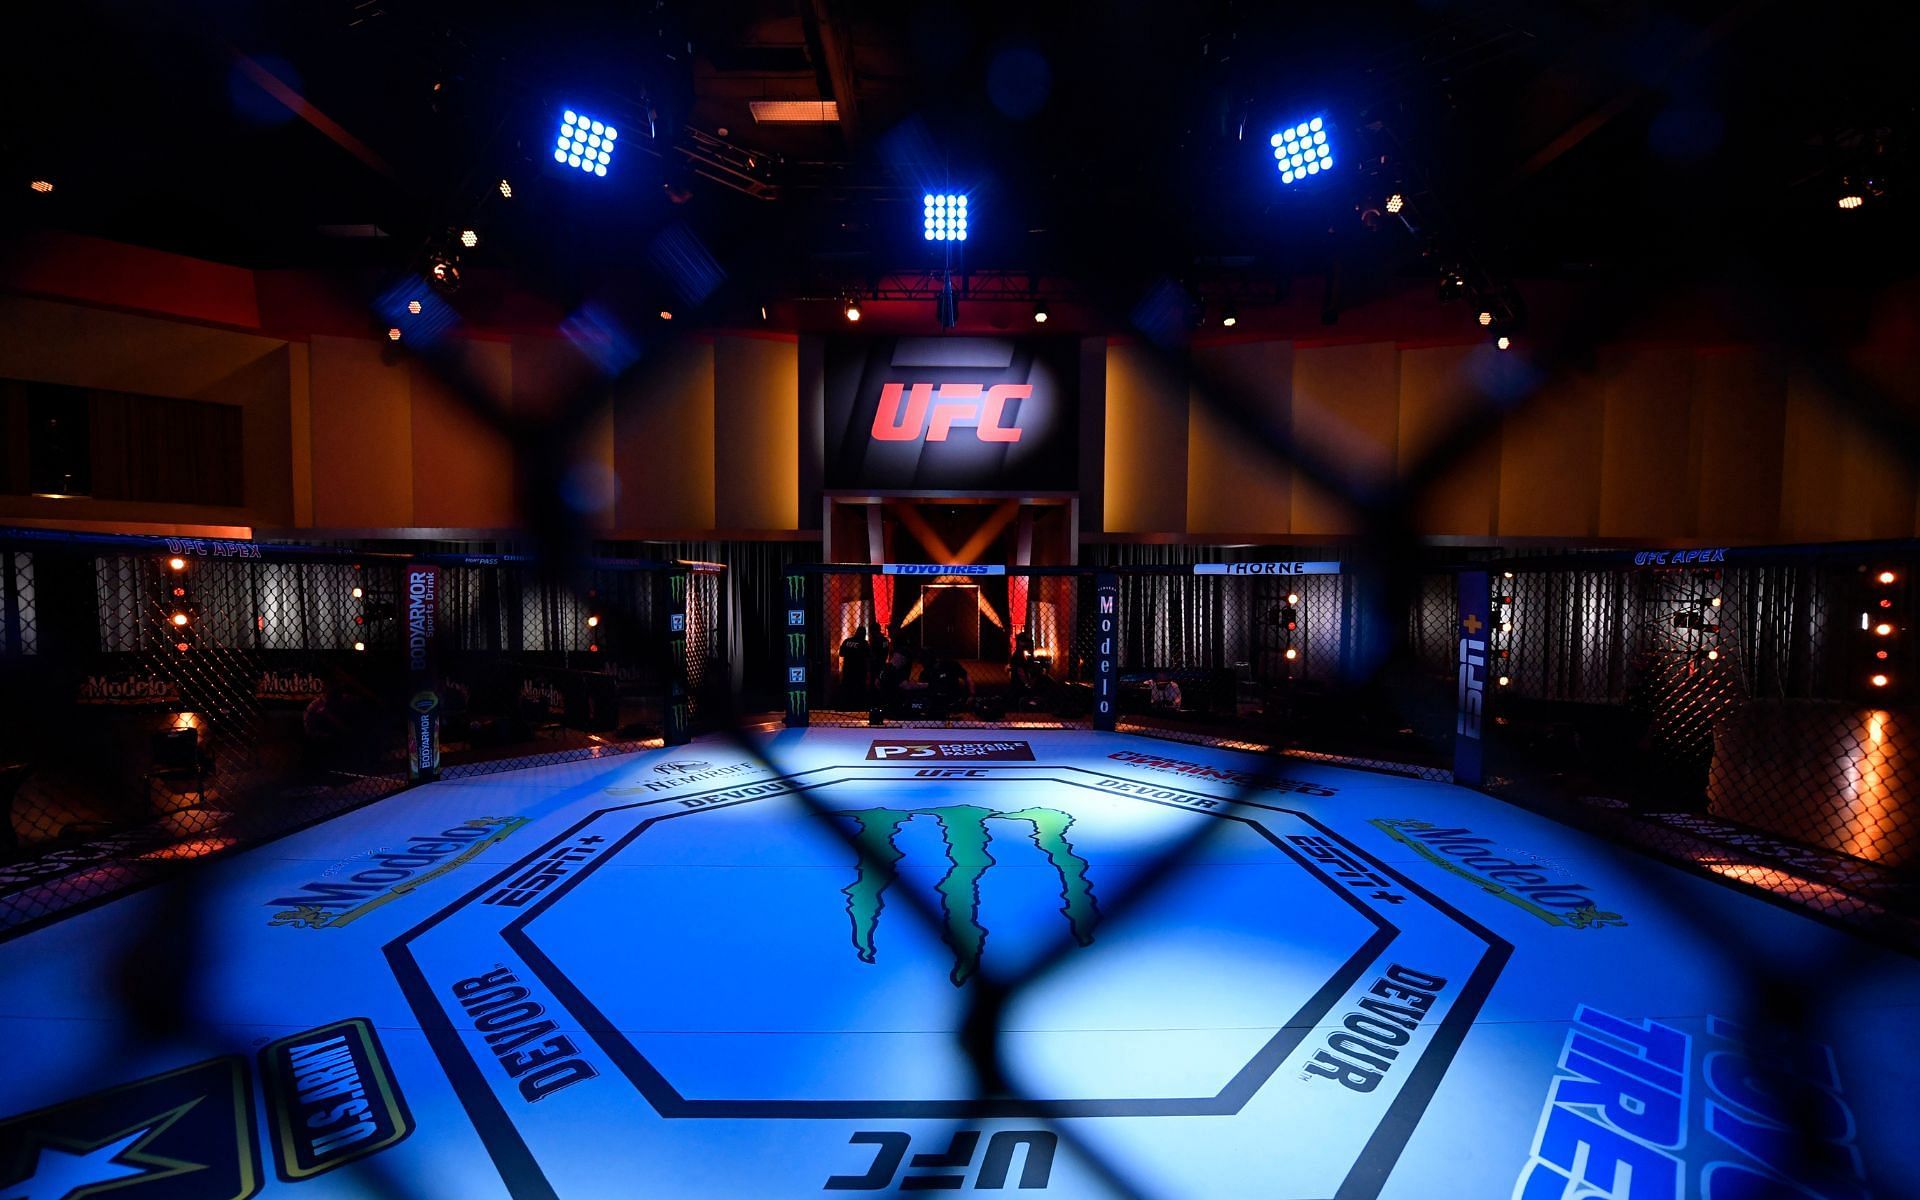 The famed UFC octagon during one of the Fight Nights